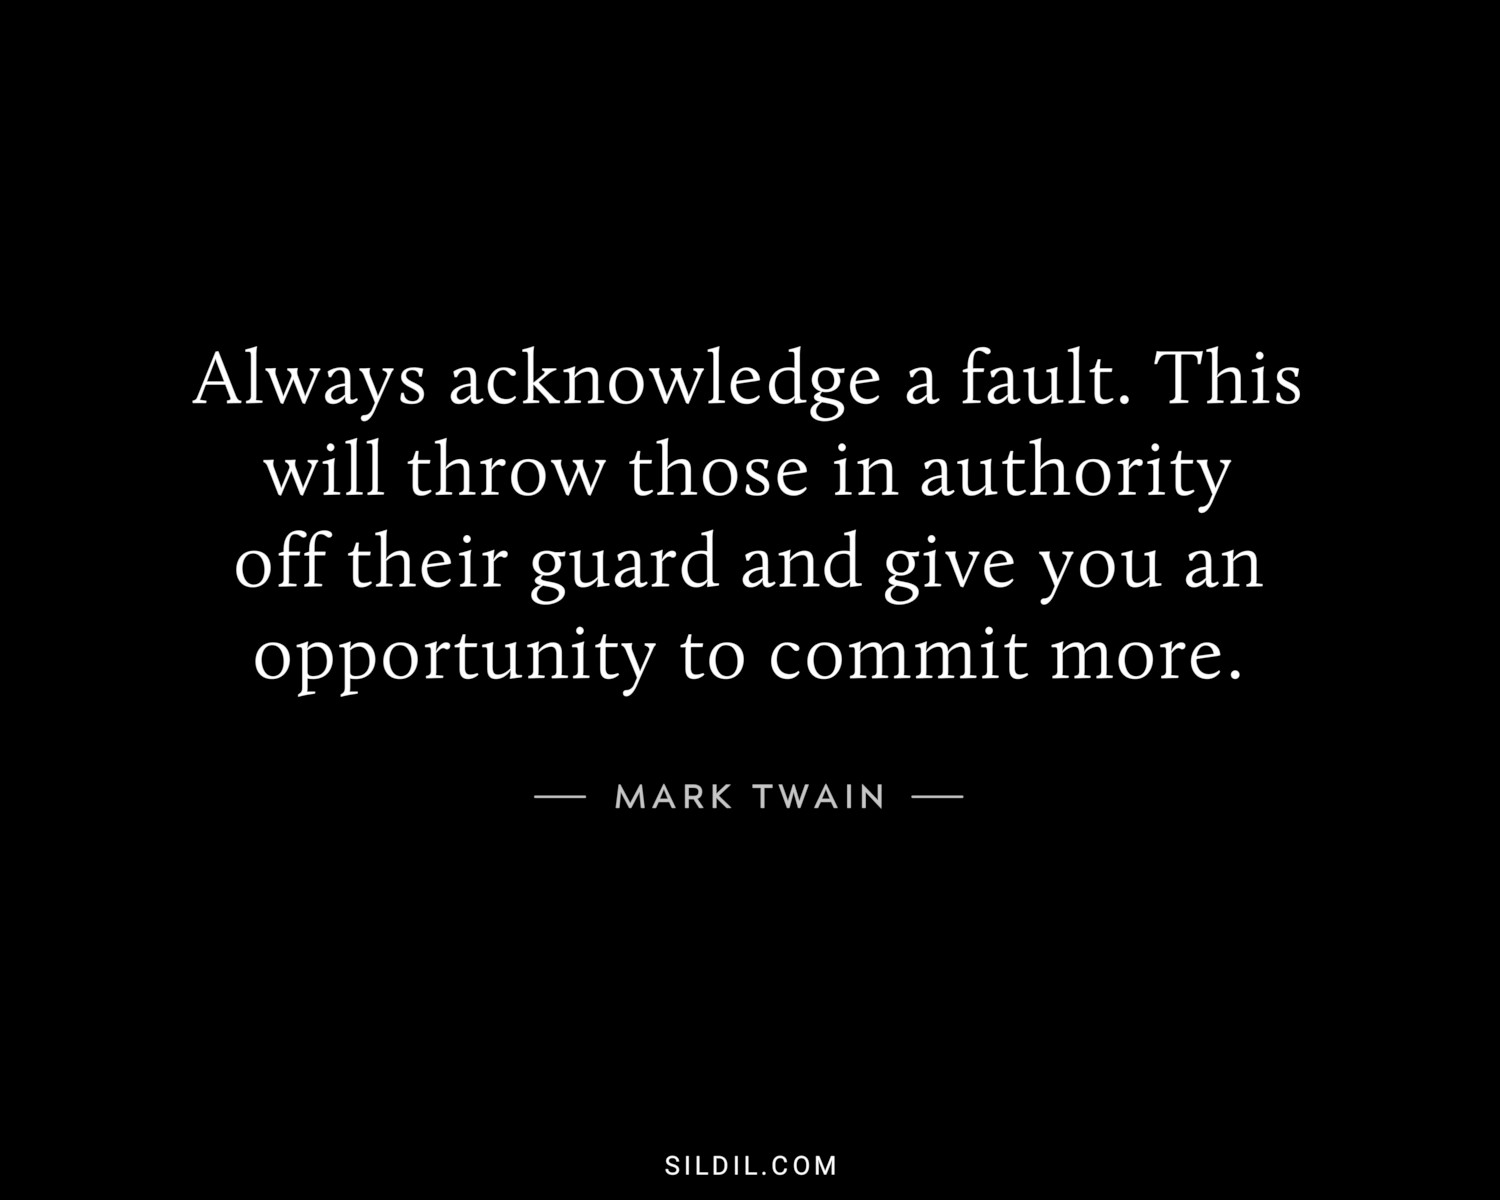 Always acknowledge a fault. This will throw those in authority off their guard and give you an opportunity to commit more.